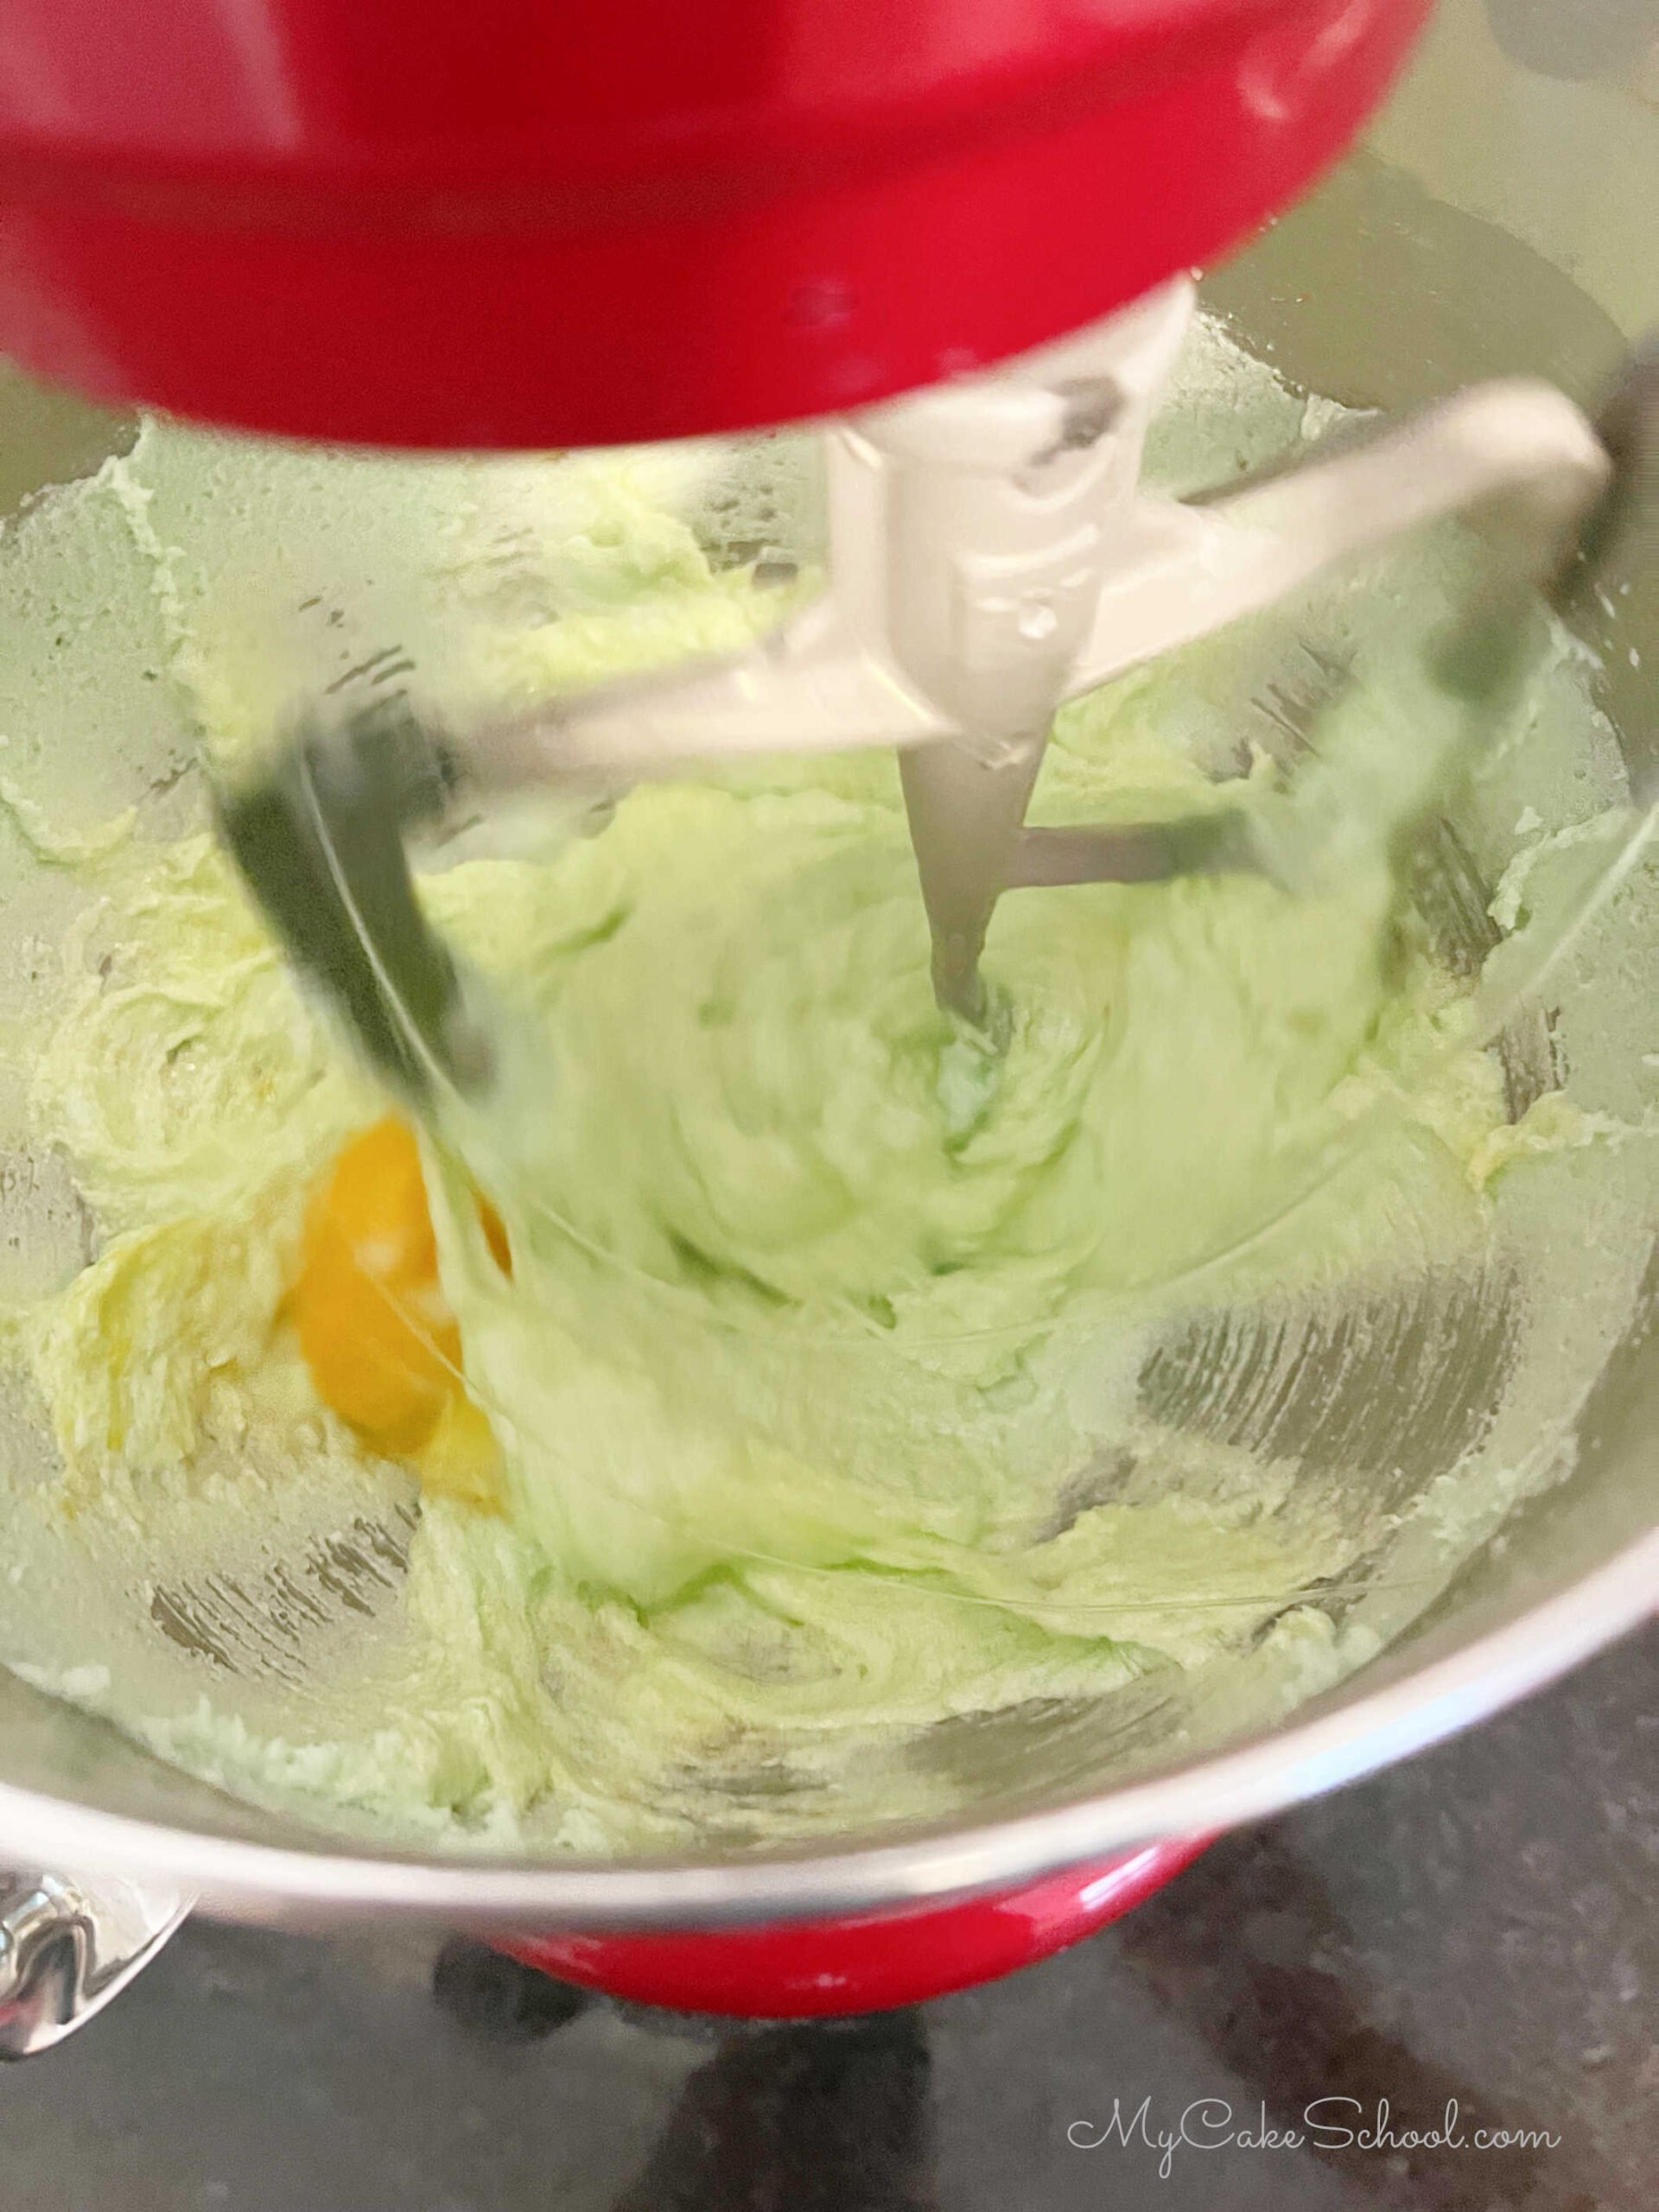 Adding eggs to the butter, sugar, and jello mixture.